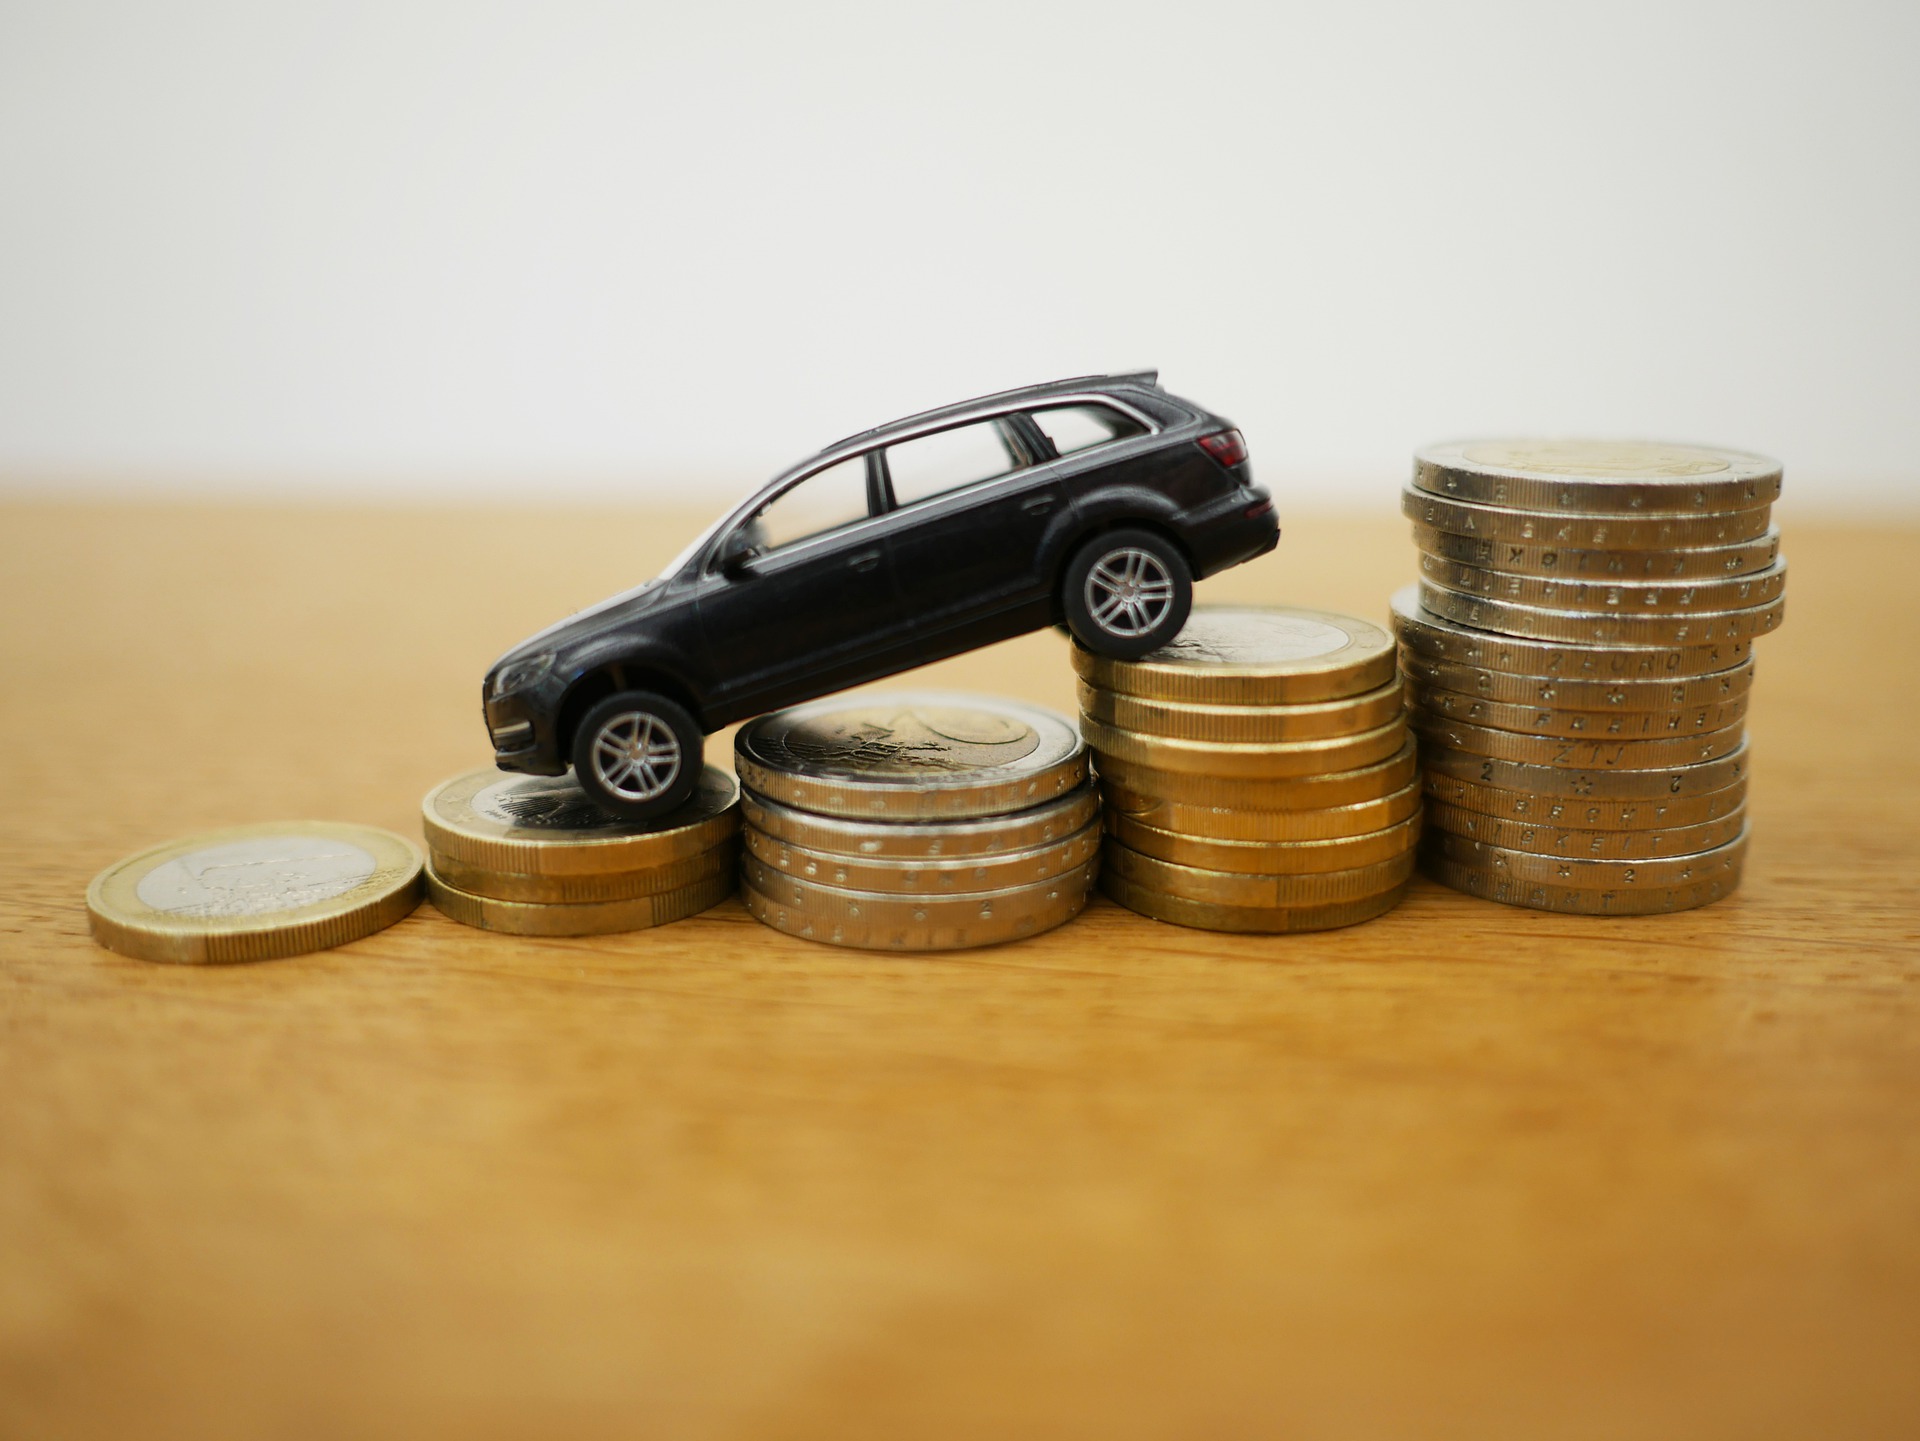 Toy car on euro coins - Car purchase thanks to small VAT?